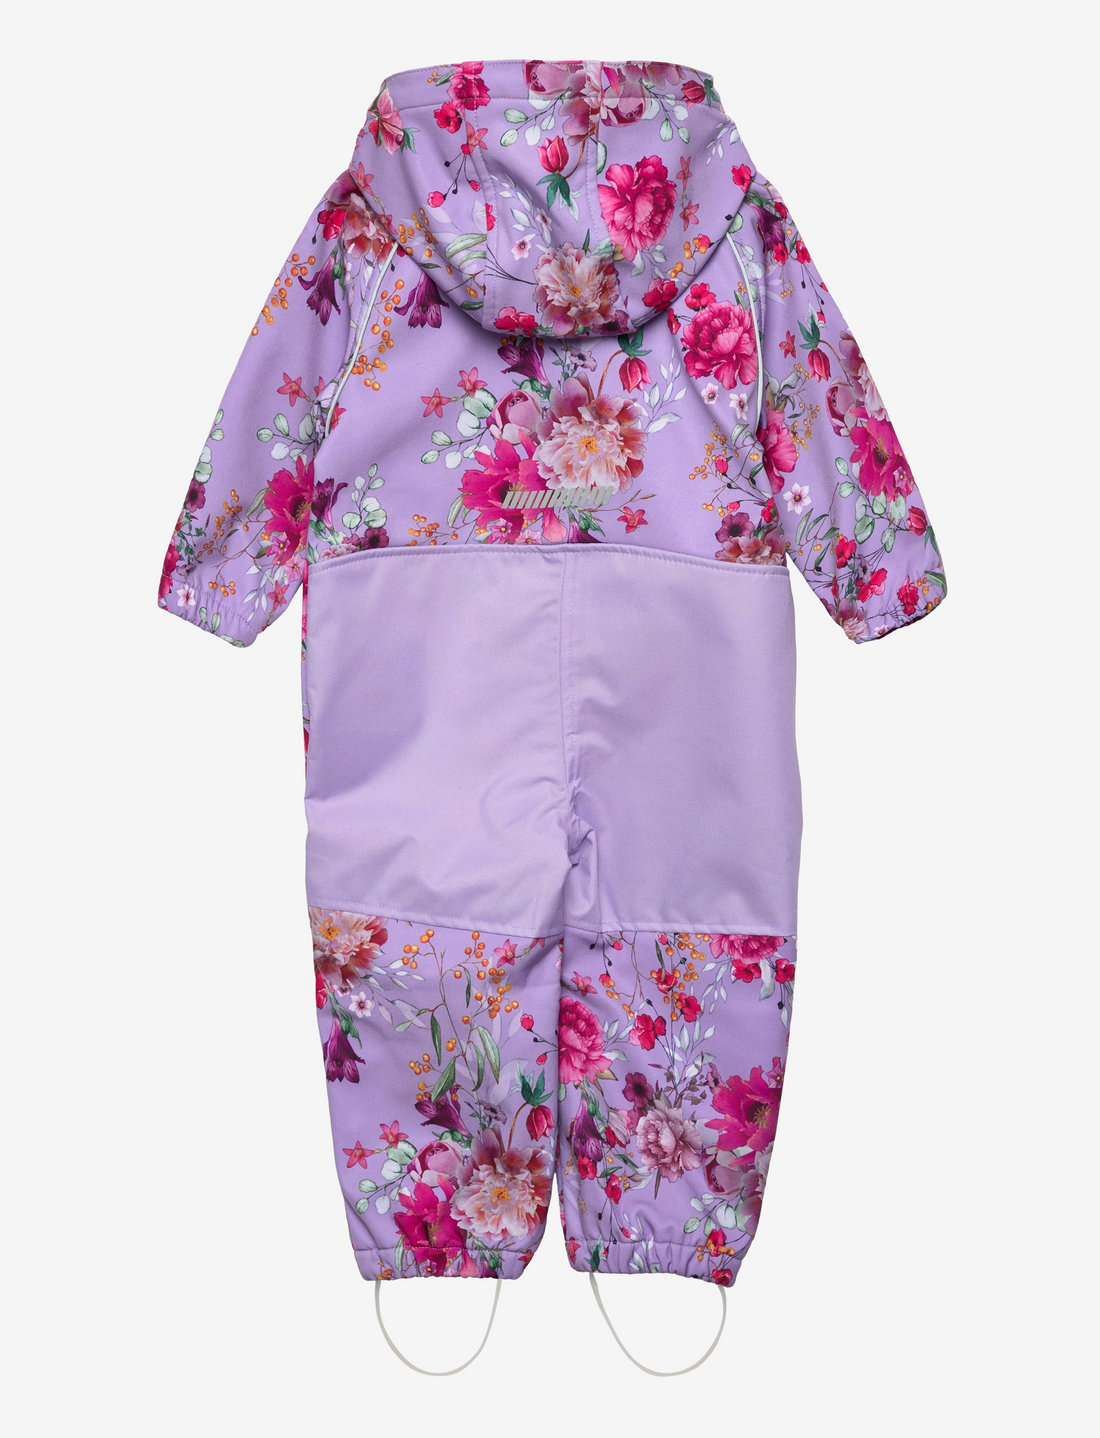 name it Nmfalfa Suit Floral 2fo Noos - 49.99 €. Buy Coveralls from name it  online at Boozt.com. Fast delivery and easy returns